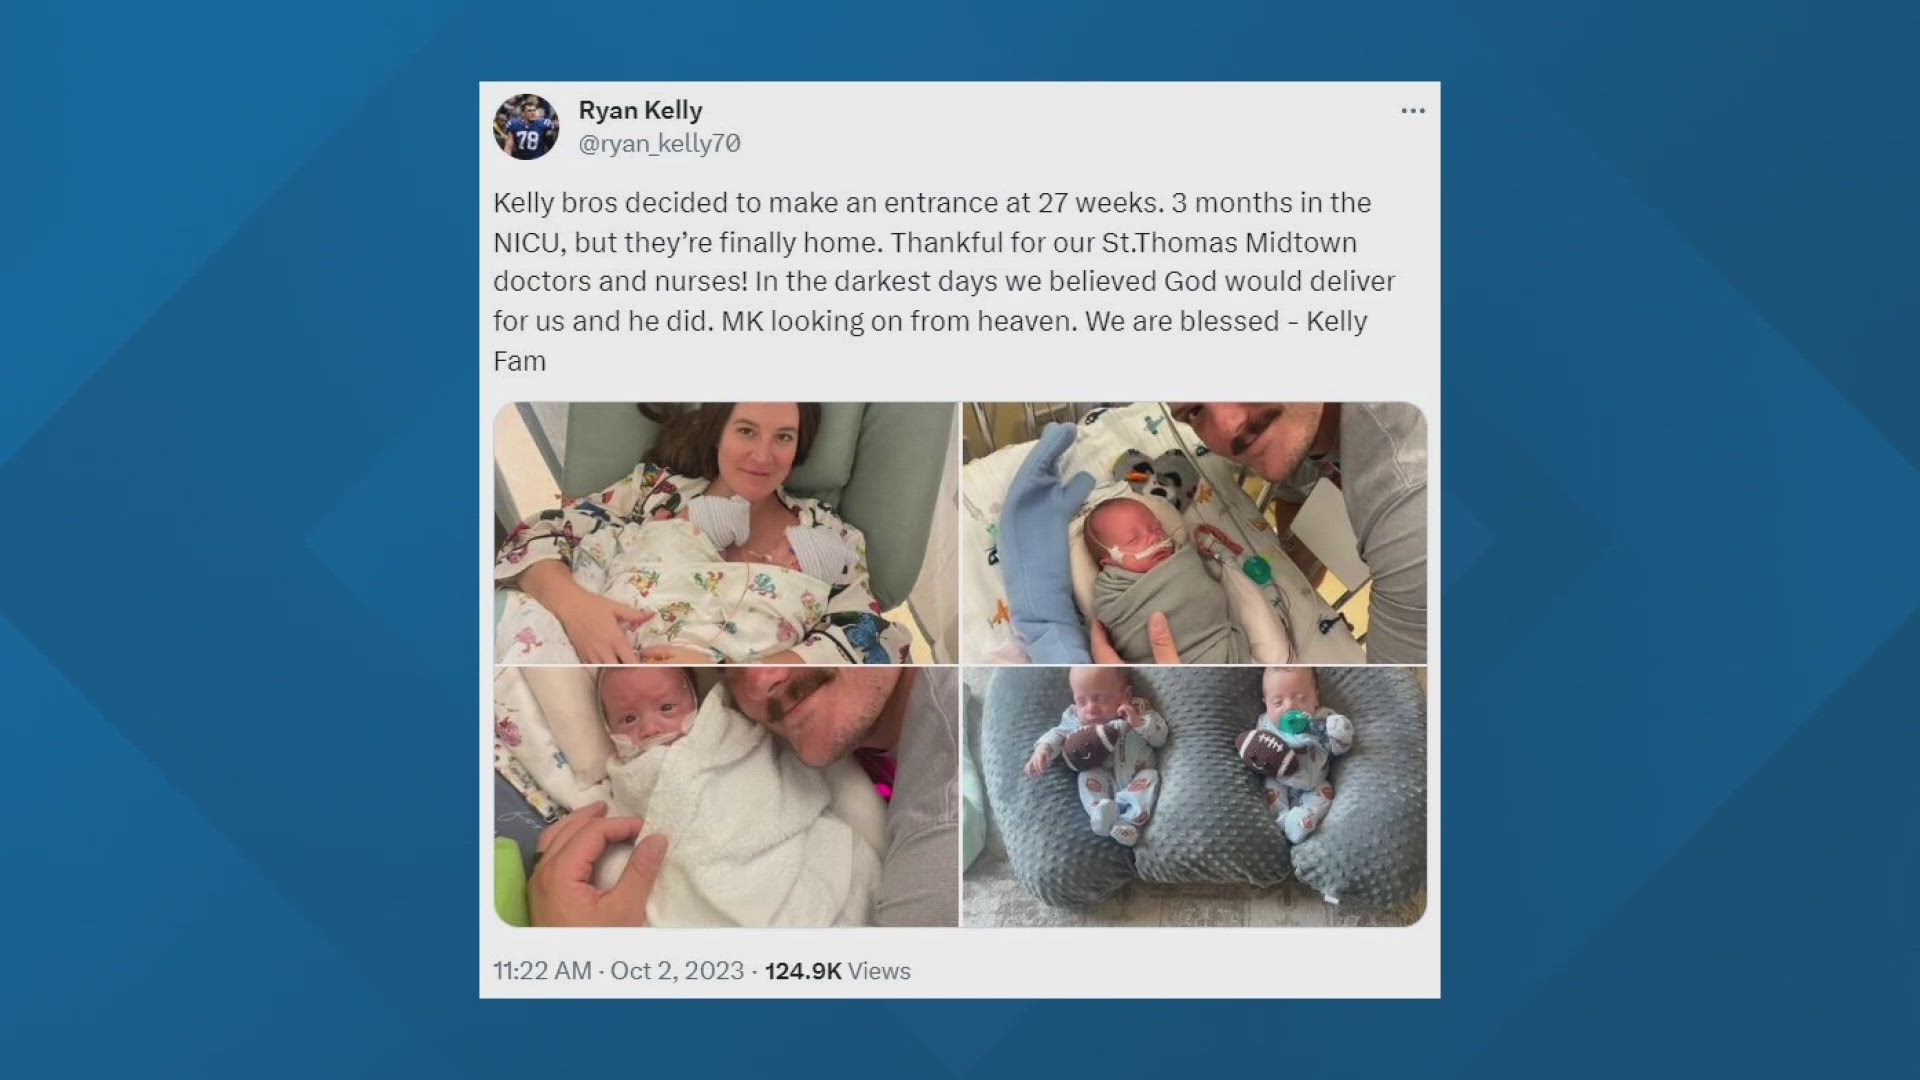 Ryan Kelly and his wife, Emma, announced the births of their twin sons, Duke and Ford, who were born on June 27 and spent three months in the NICU.